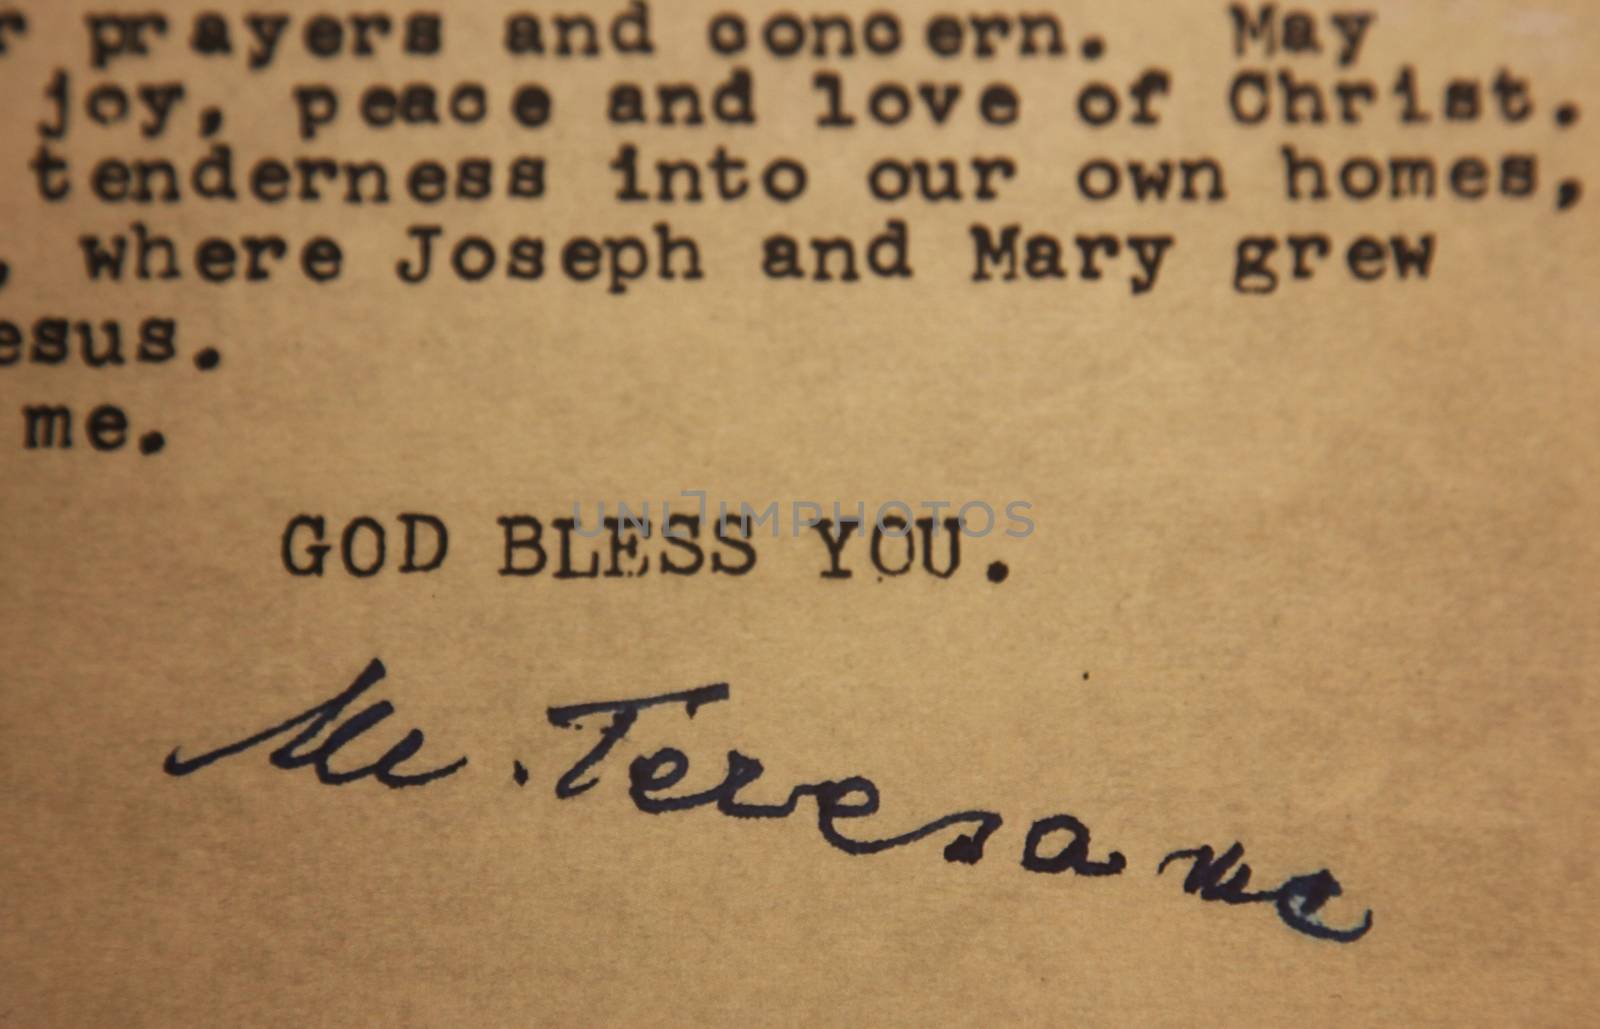 The letter signed by Mother Teresa which is exposed in Mother Teresa Memorial House in Skopje, Macedonia